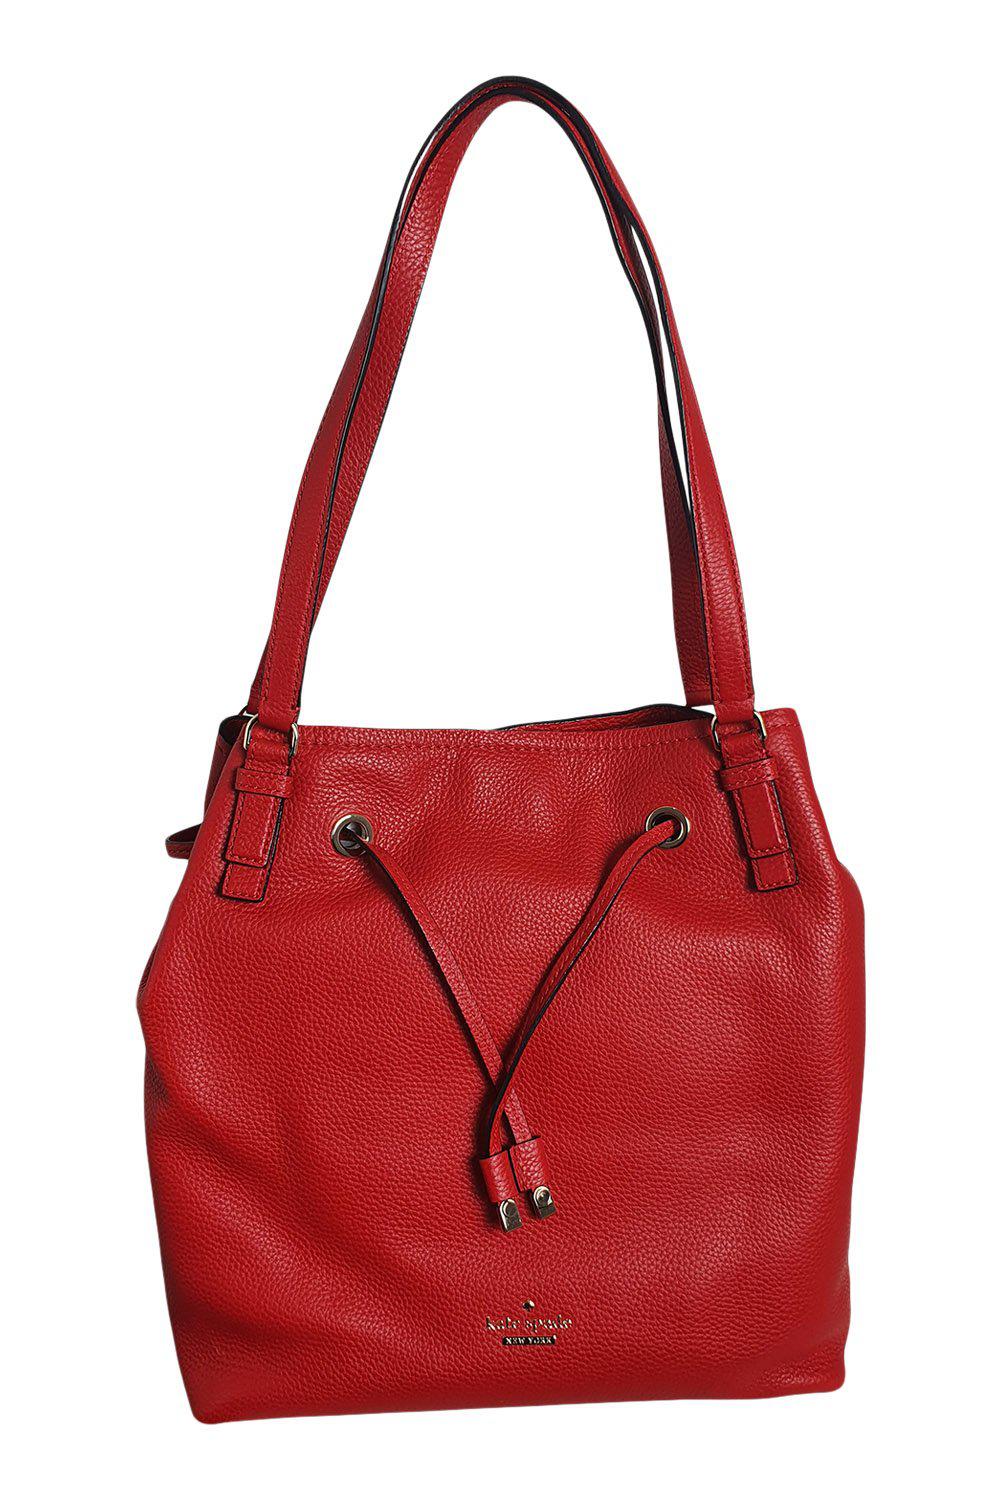 KATE SPADE Cherry Red Leather Medium Bucket Bag (M) – The Freperie